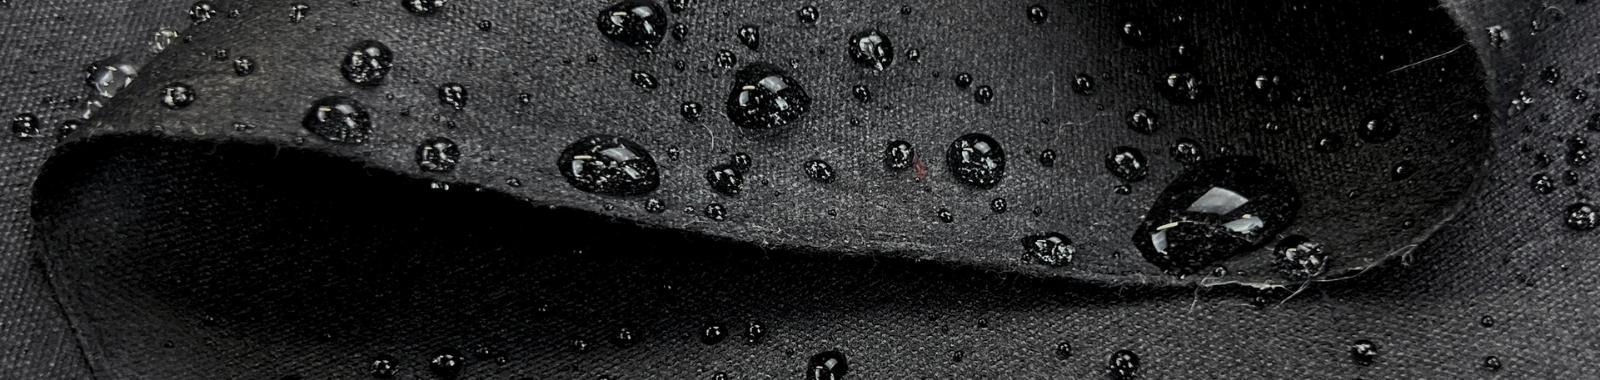 Stay_Dry_Stay_Stylish_A_Guide_To_Waterproof_Fabric_Narrow_Wax